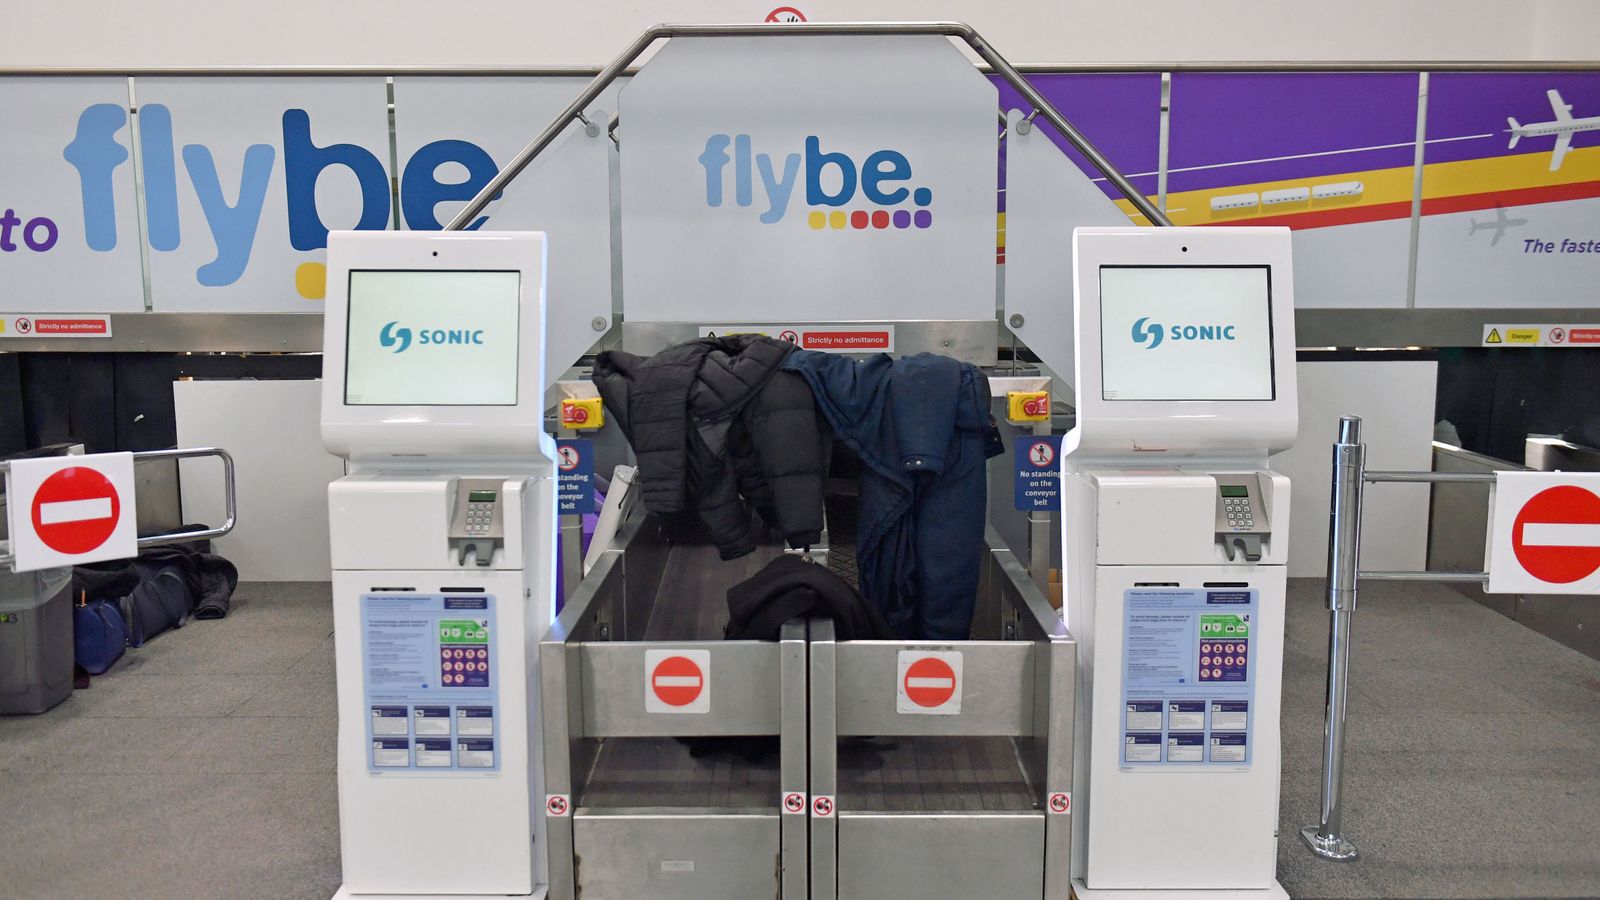 FlyBe collapse asks questions about the resilience of UK’s transport infrastructure